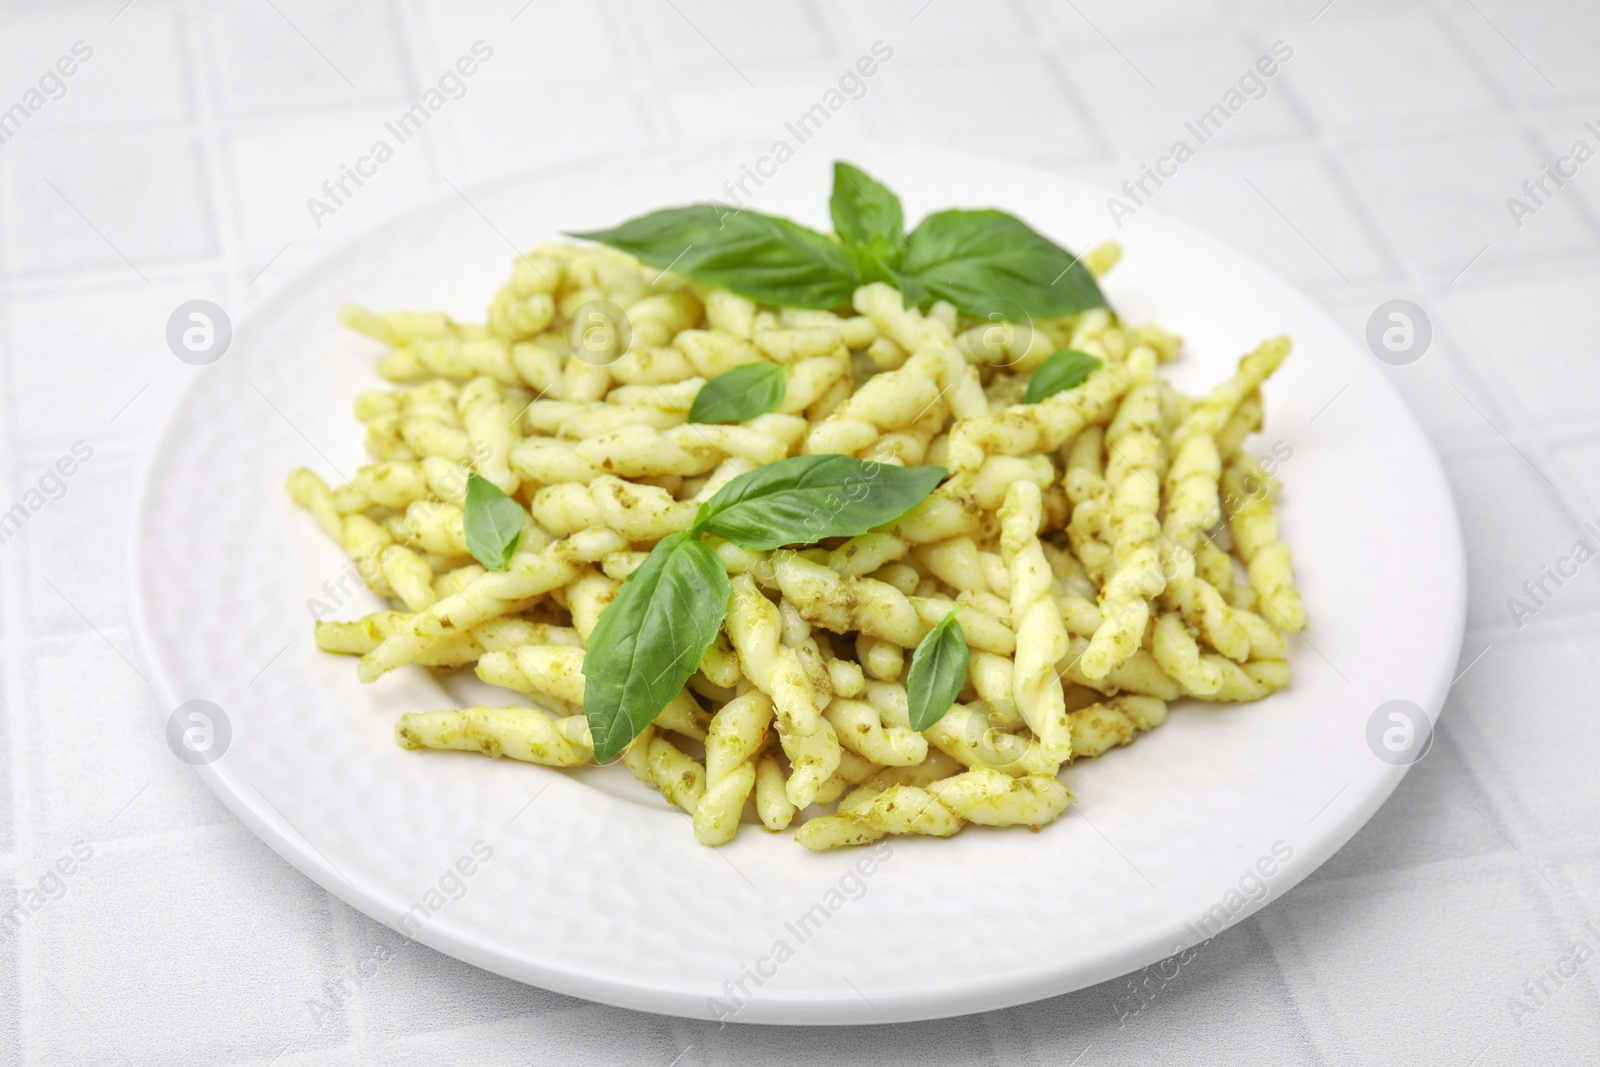 Photo of Plate of delicious trofie pasta with pesto sauce and basil leaves on white tiled table